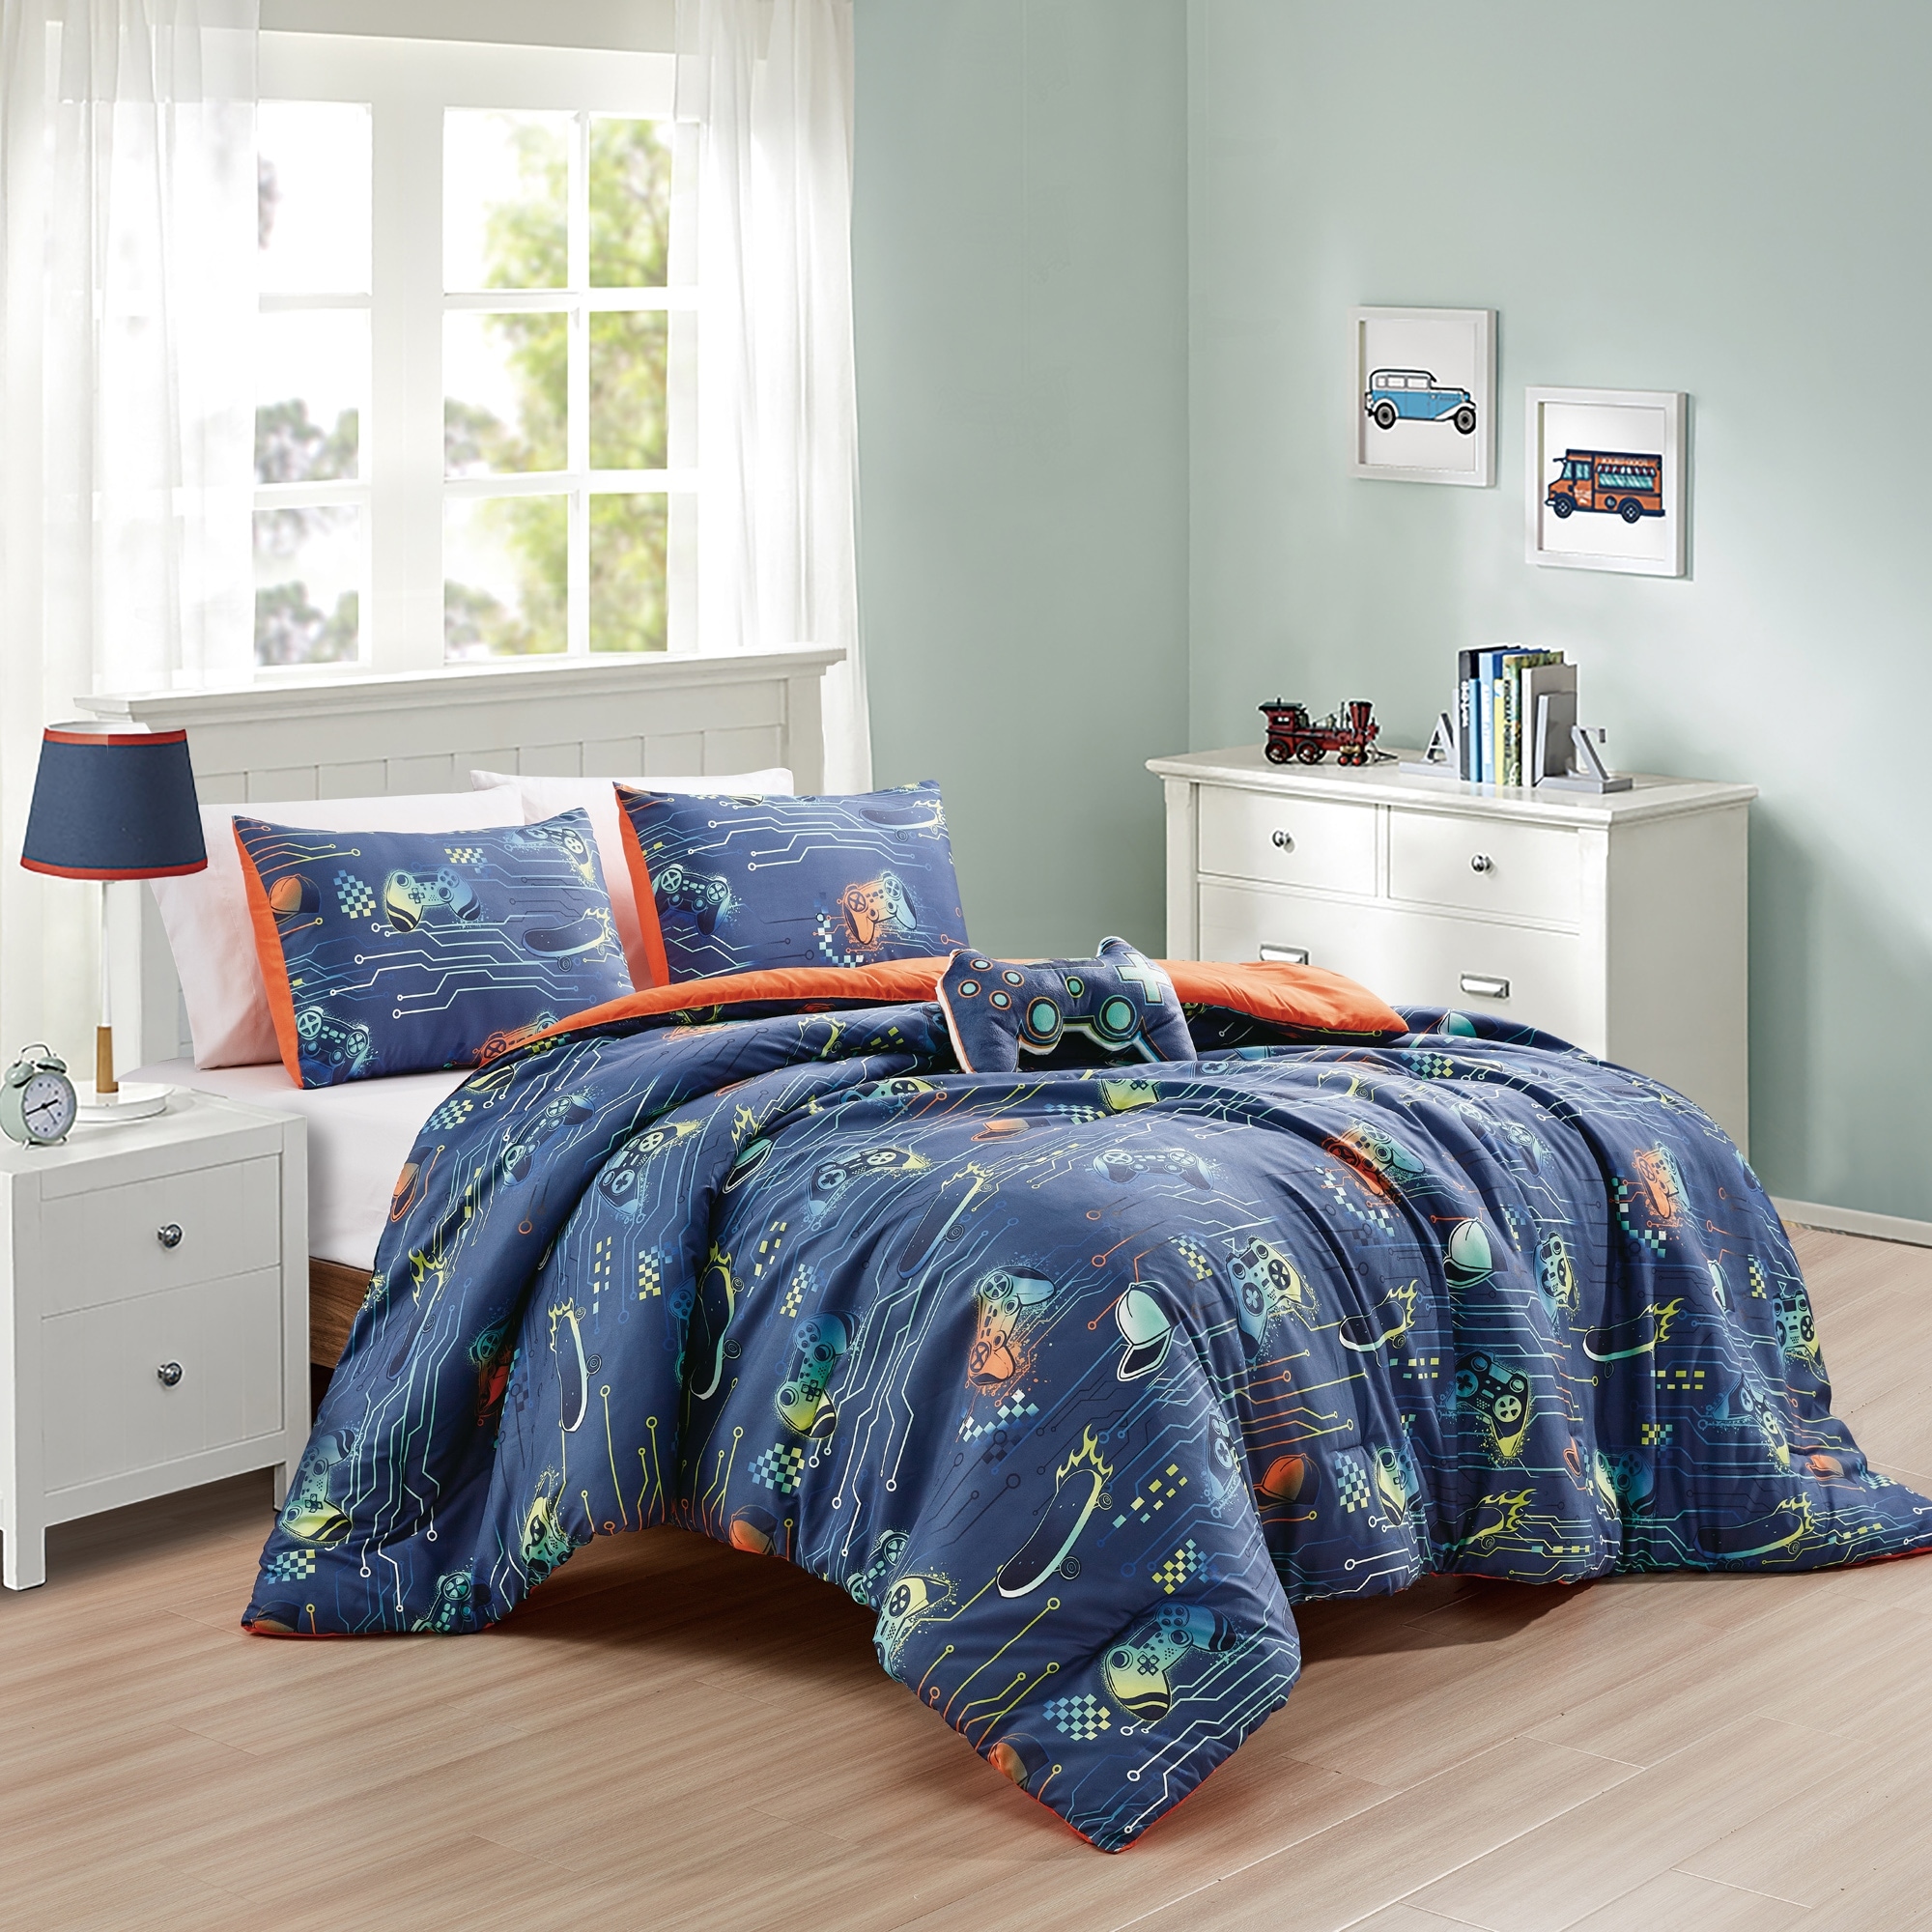 Blue Kids Comforters and Sets - Bed Bath & Beyond